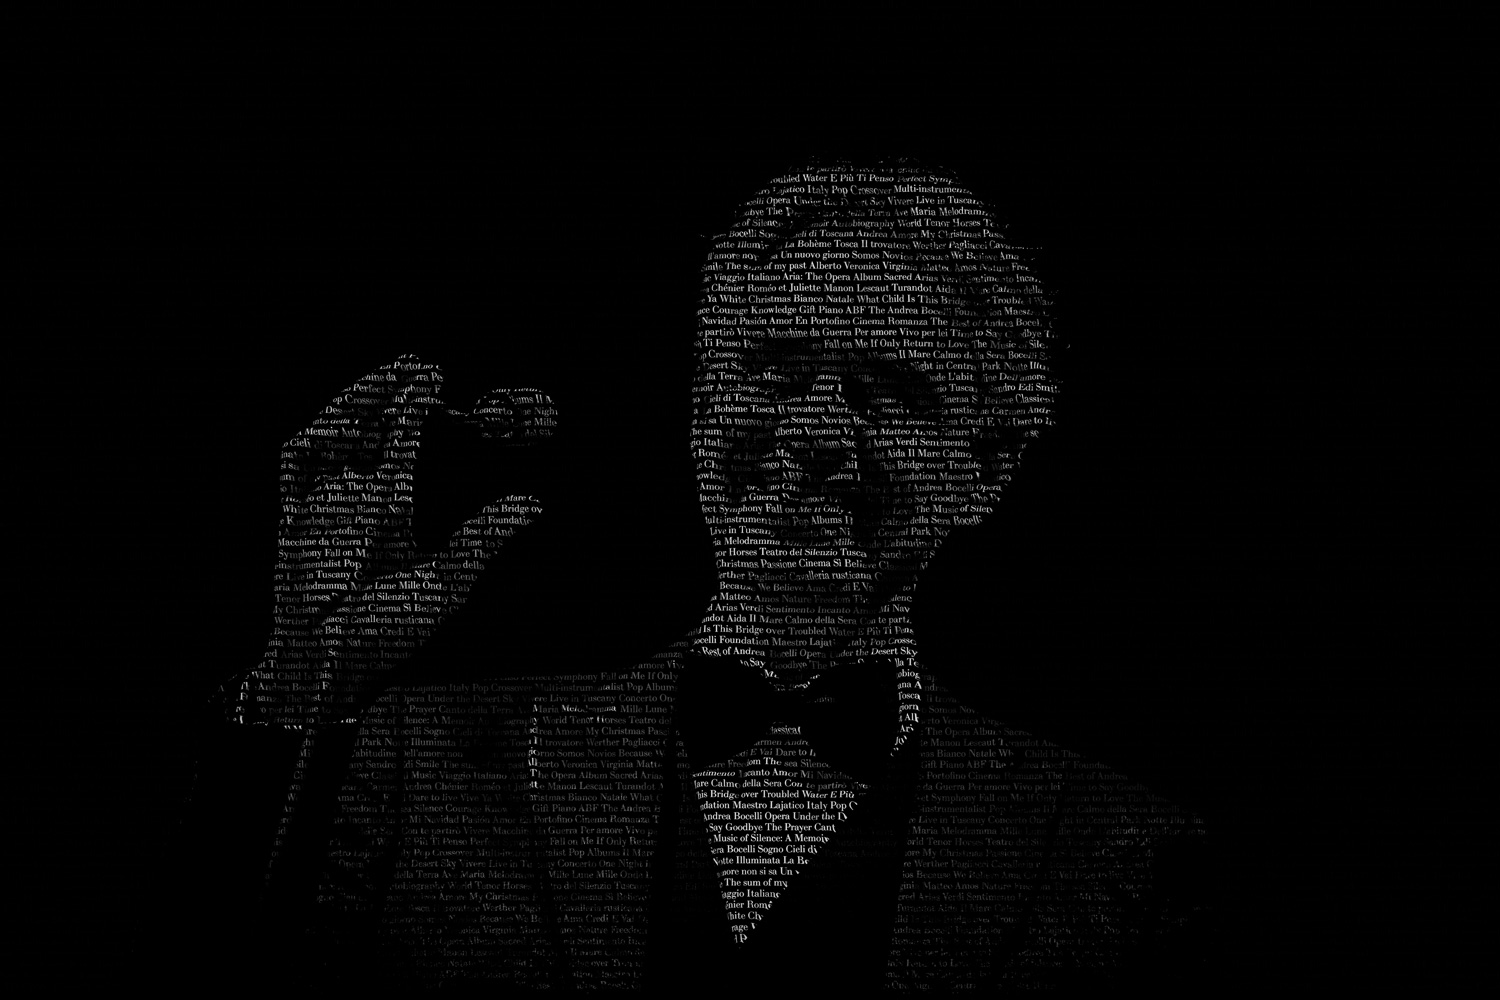 Portrait of Andrea Bocelli shown as white letters on a black background